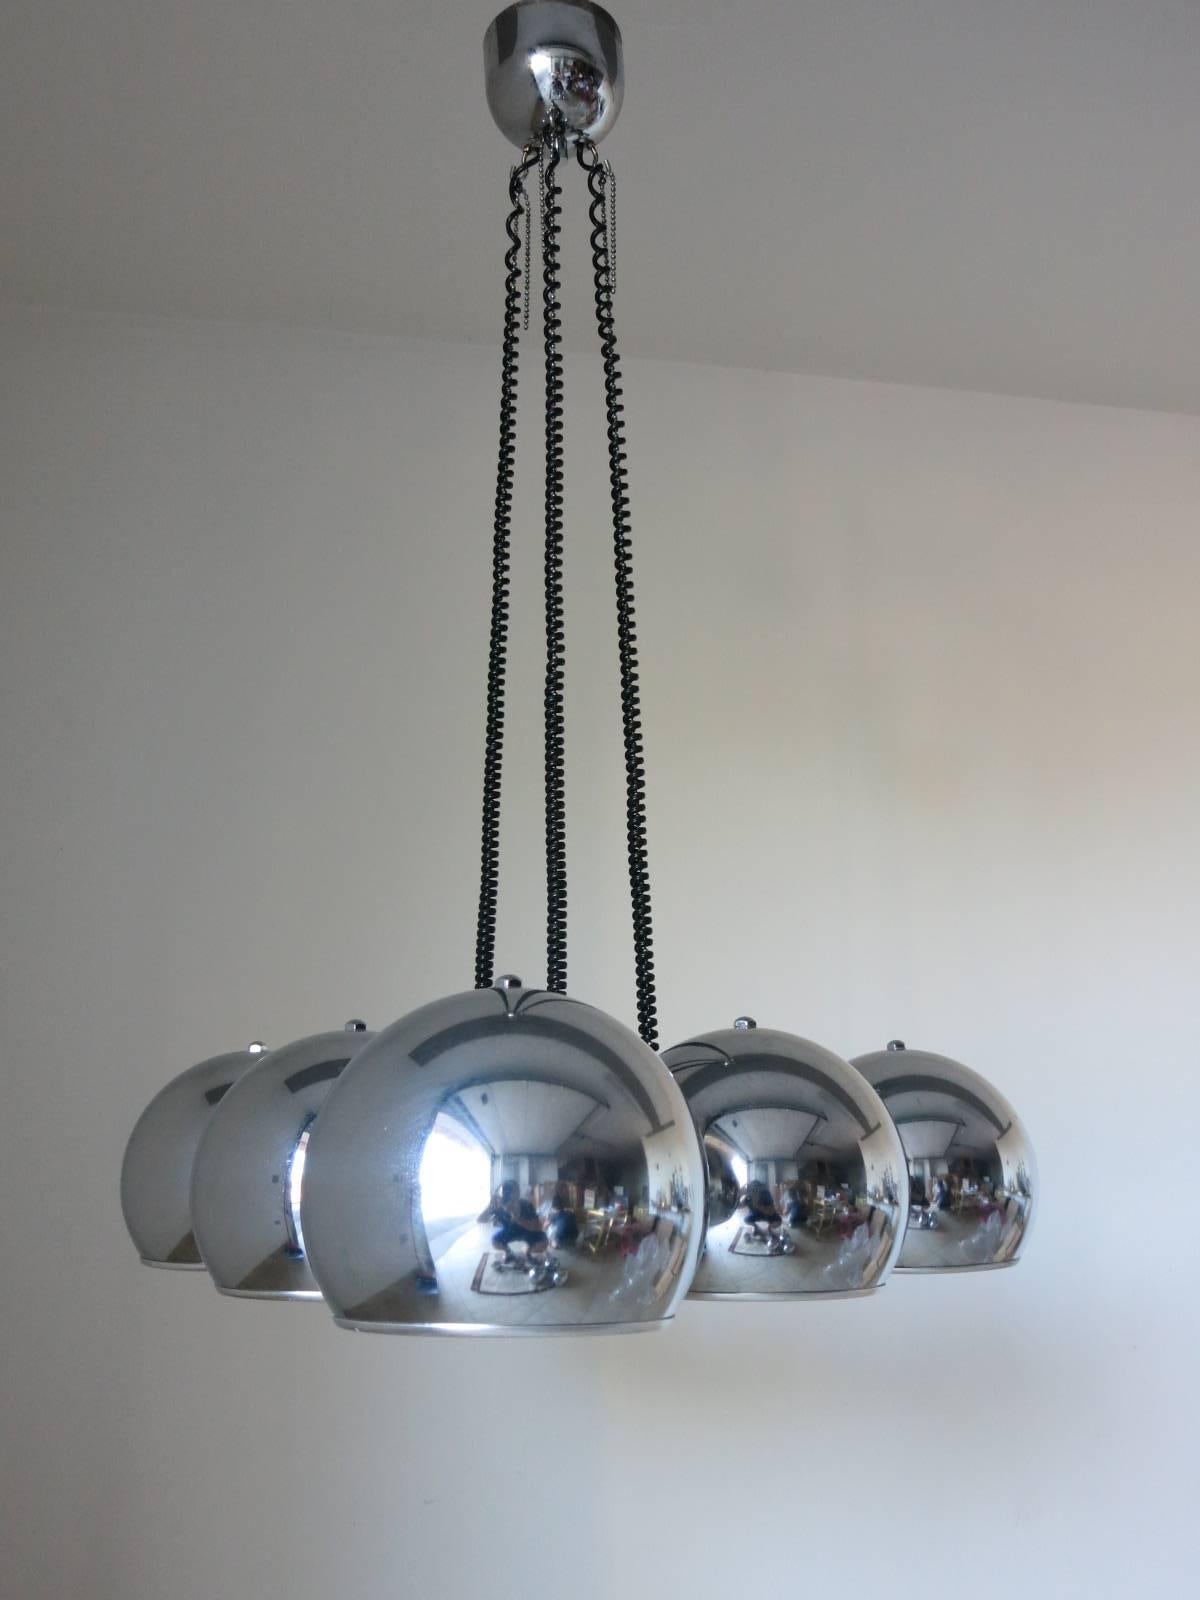 Vintage Italian pendant with six chrome globes mounted in a triangular shape / Designed by Gino Sarfatti circa 1970’s / Made in Italy
6 lights / E26 or E27 type / max 60W each
Diameter: 28 inches / Maximum Height: 41 inches (Height is adjustable)
1